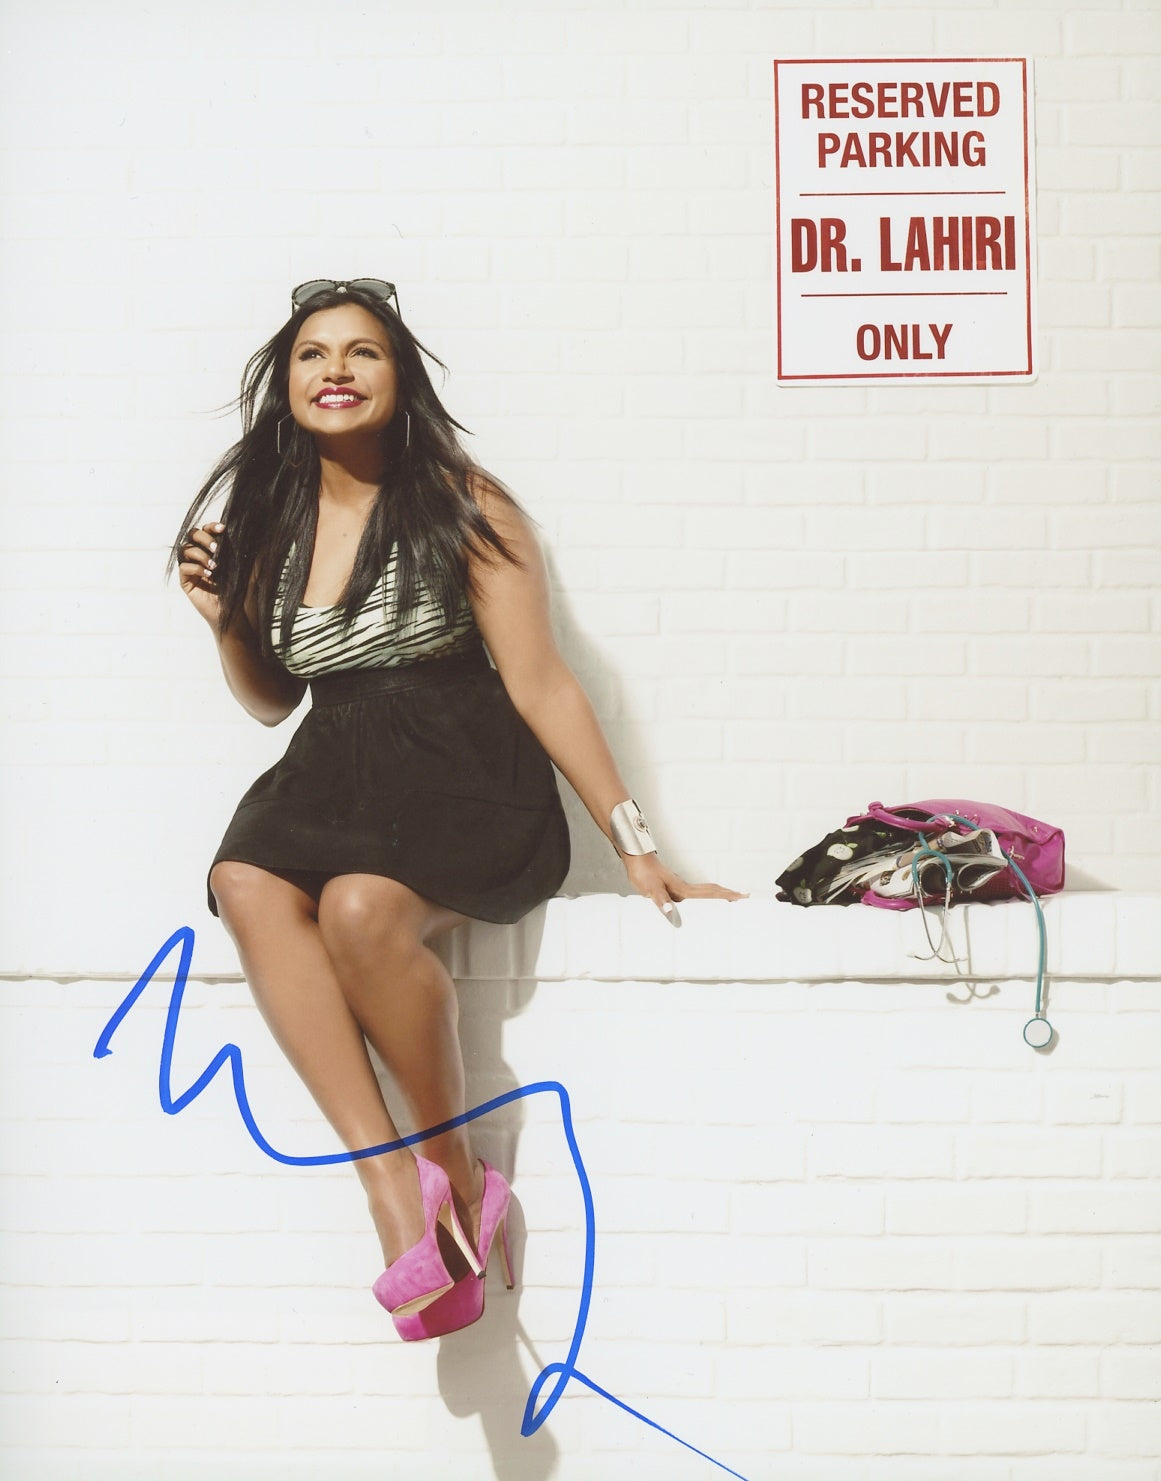 Mindy Kaling Signed 8x10 Photo - Video Proof